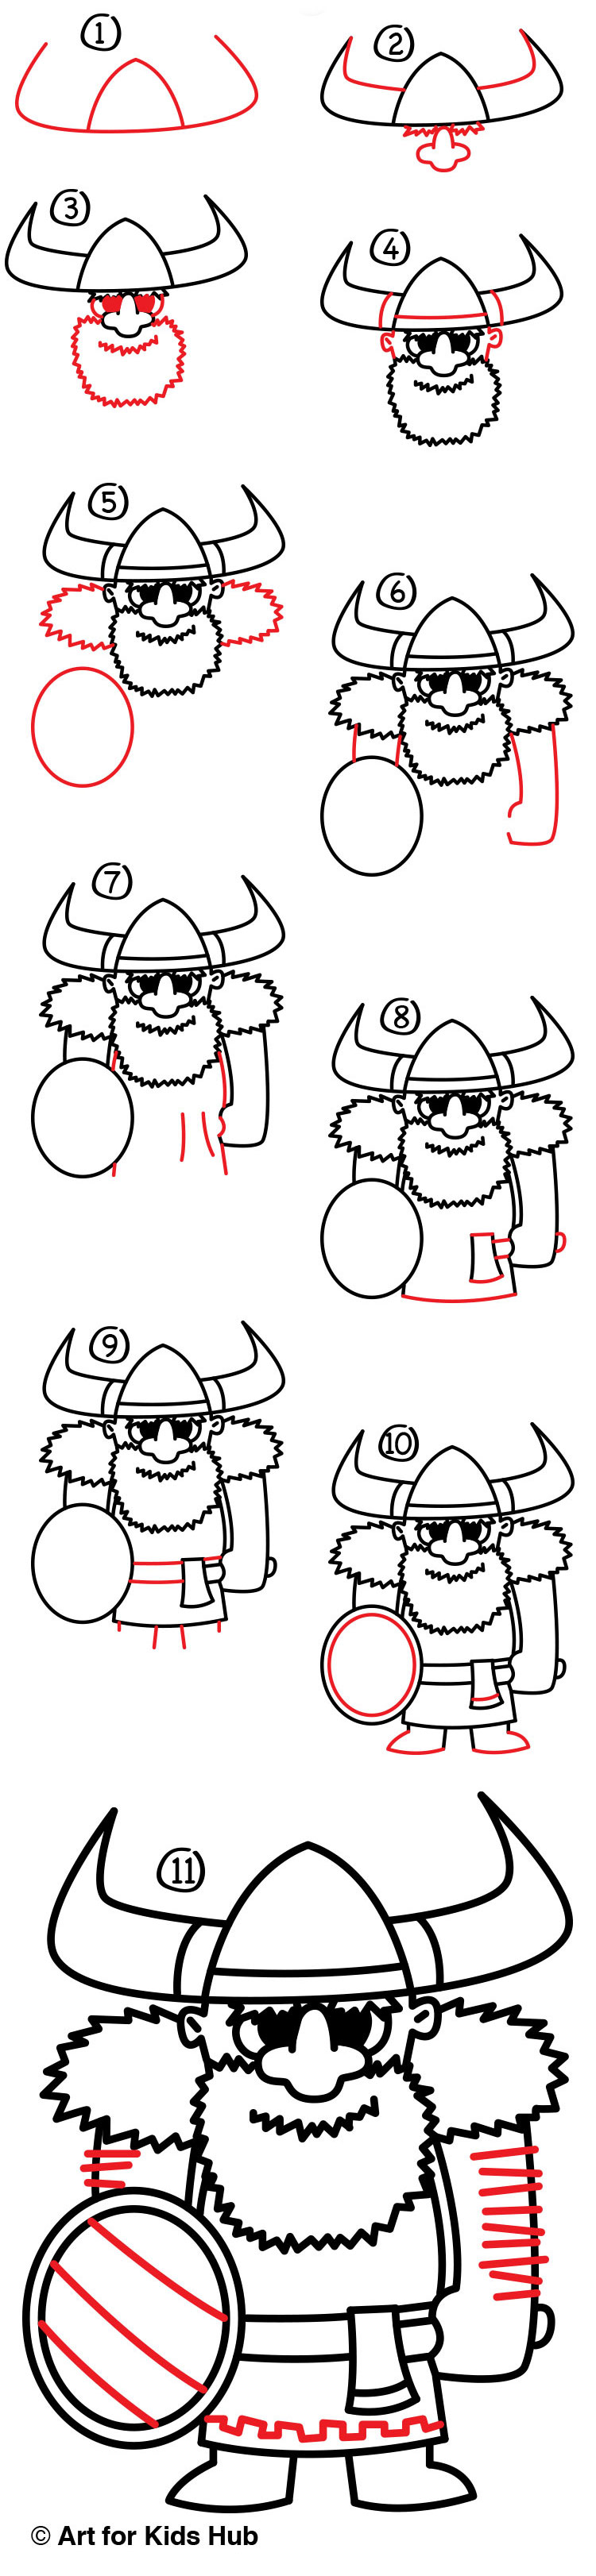 How To Draw A Viking Step By Step - Design Talk